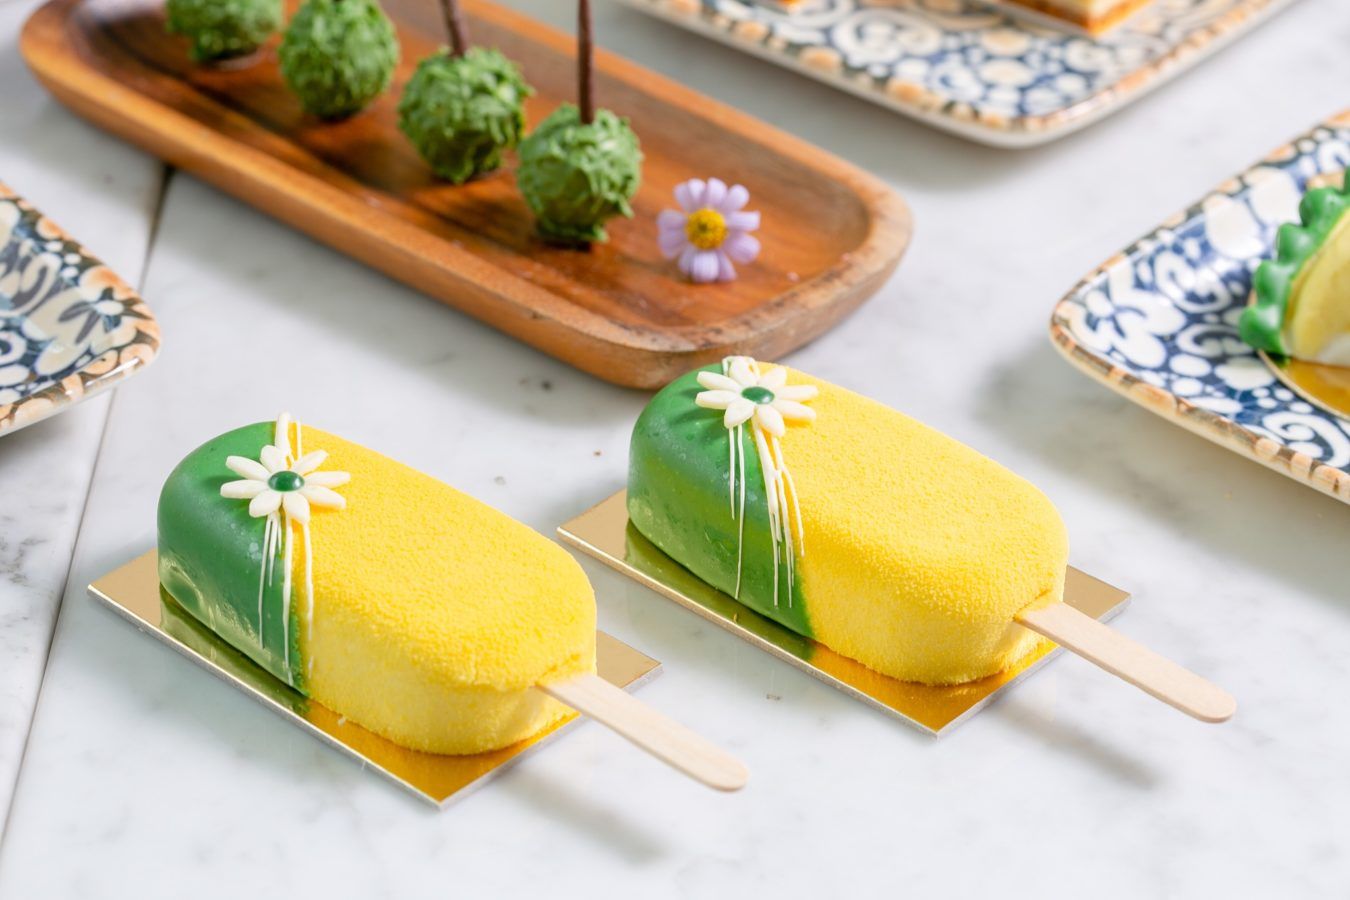 Where to Find Rich and Creamy Durian Desserts This Season